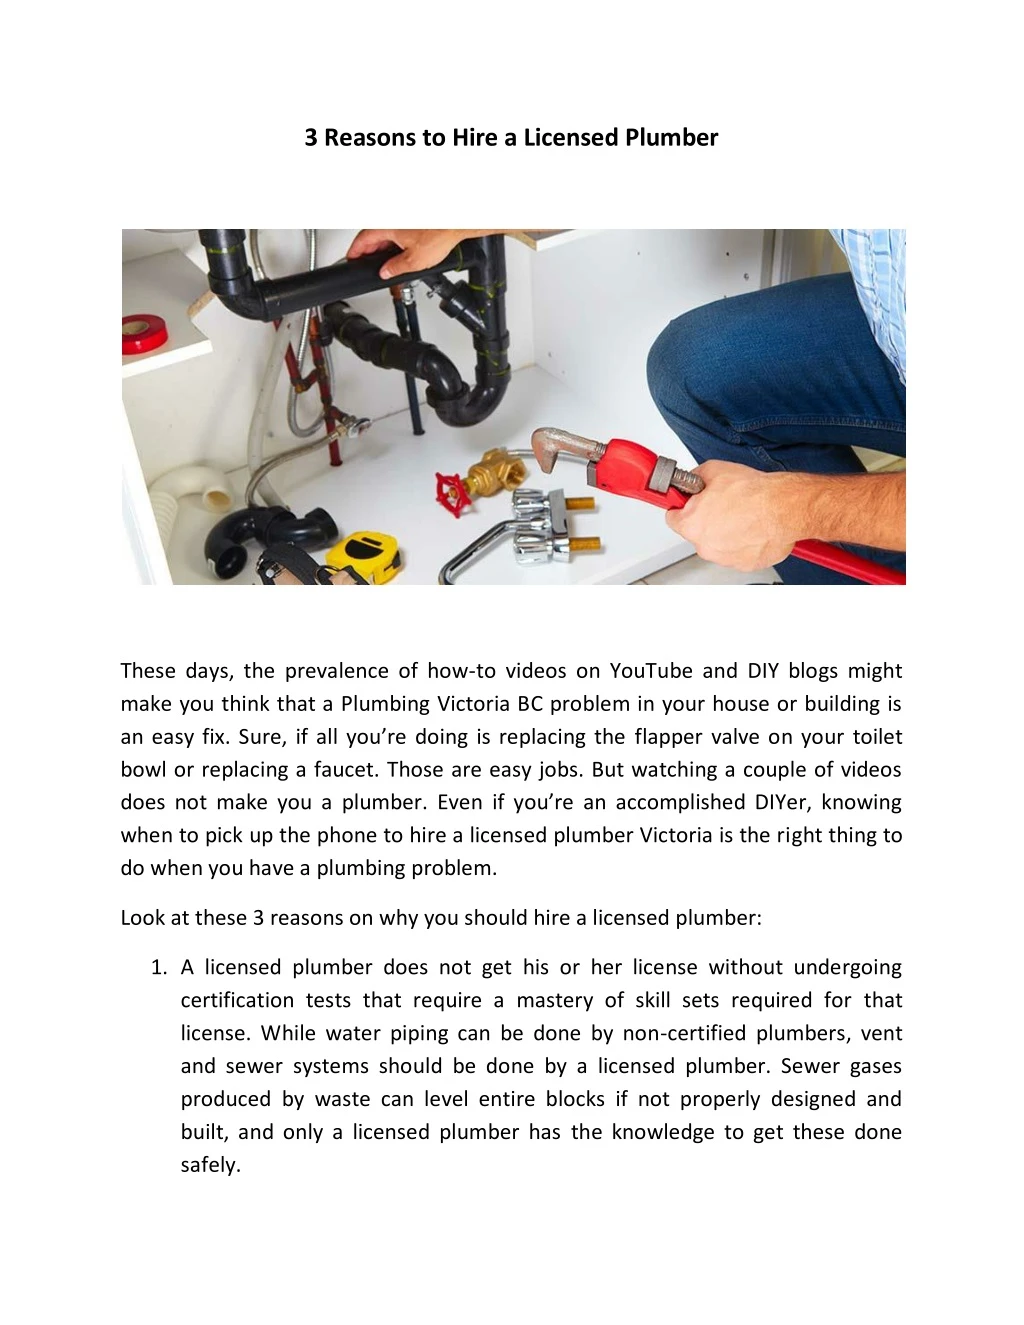 3 reasons to hire a licensed plumber